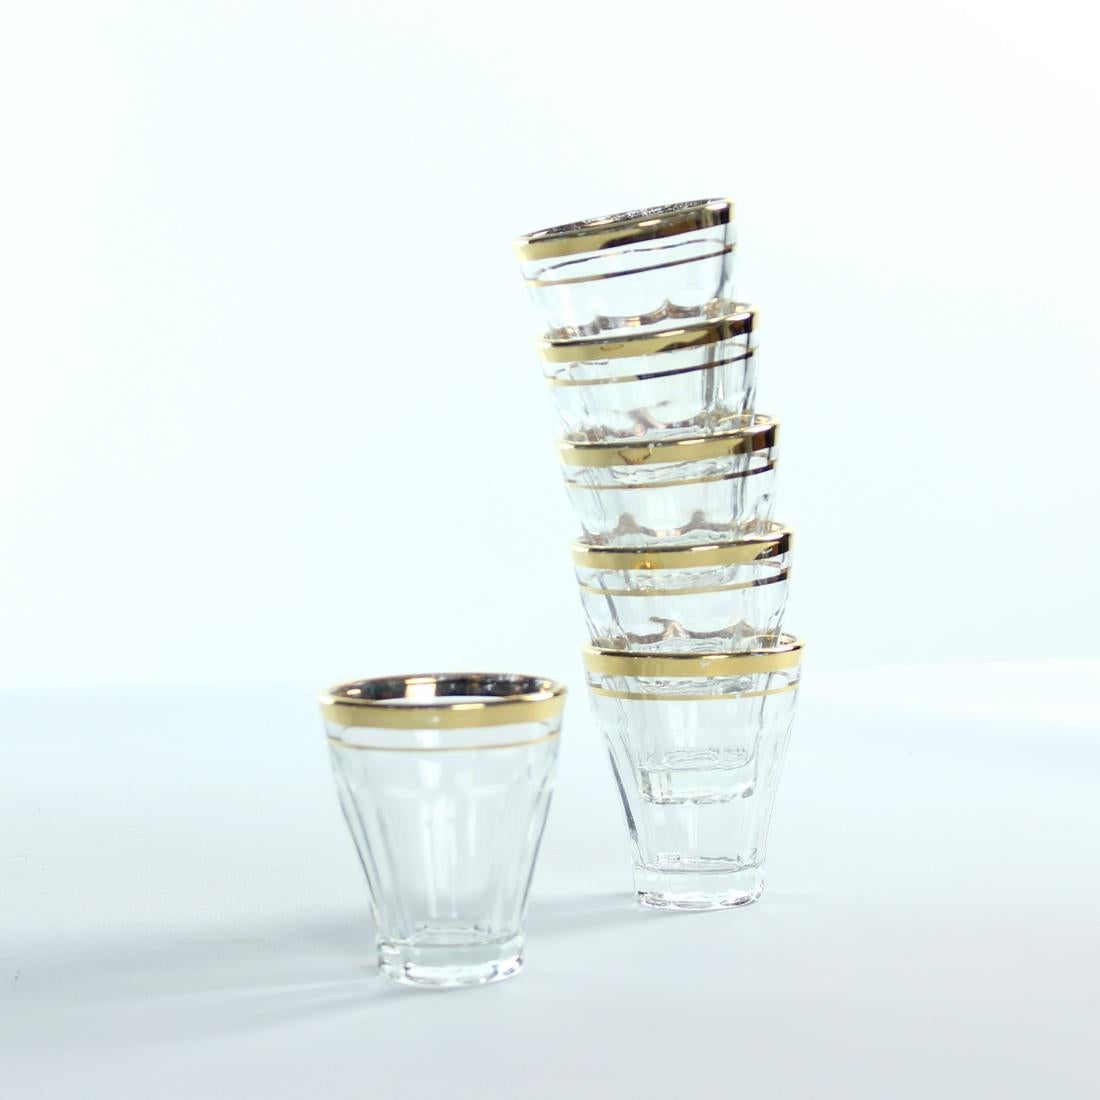 Vintage Drinking Glasses With Gold Rim, Set Of 6, Czechoslovakia 1960s For Sale 3